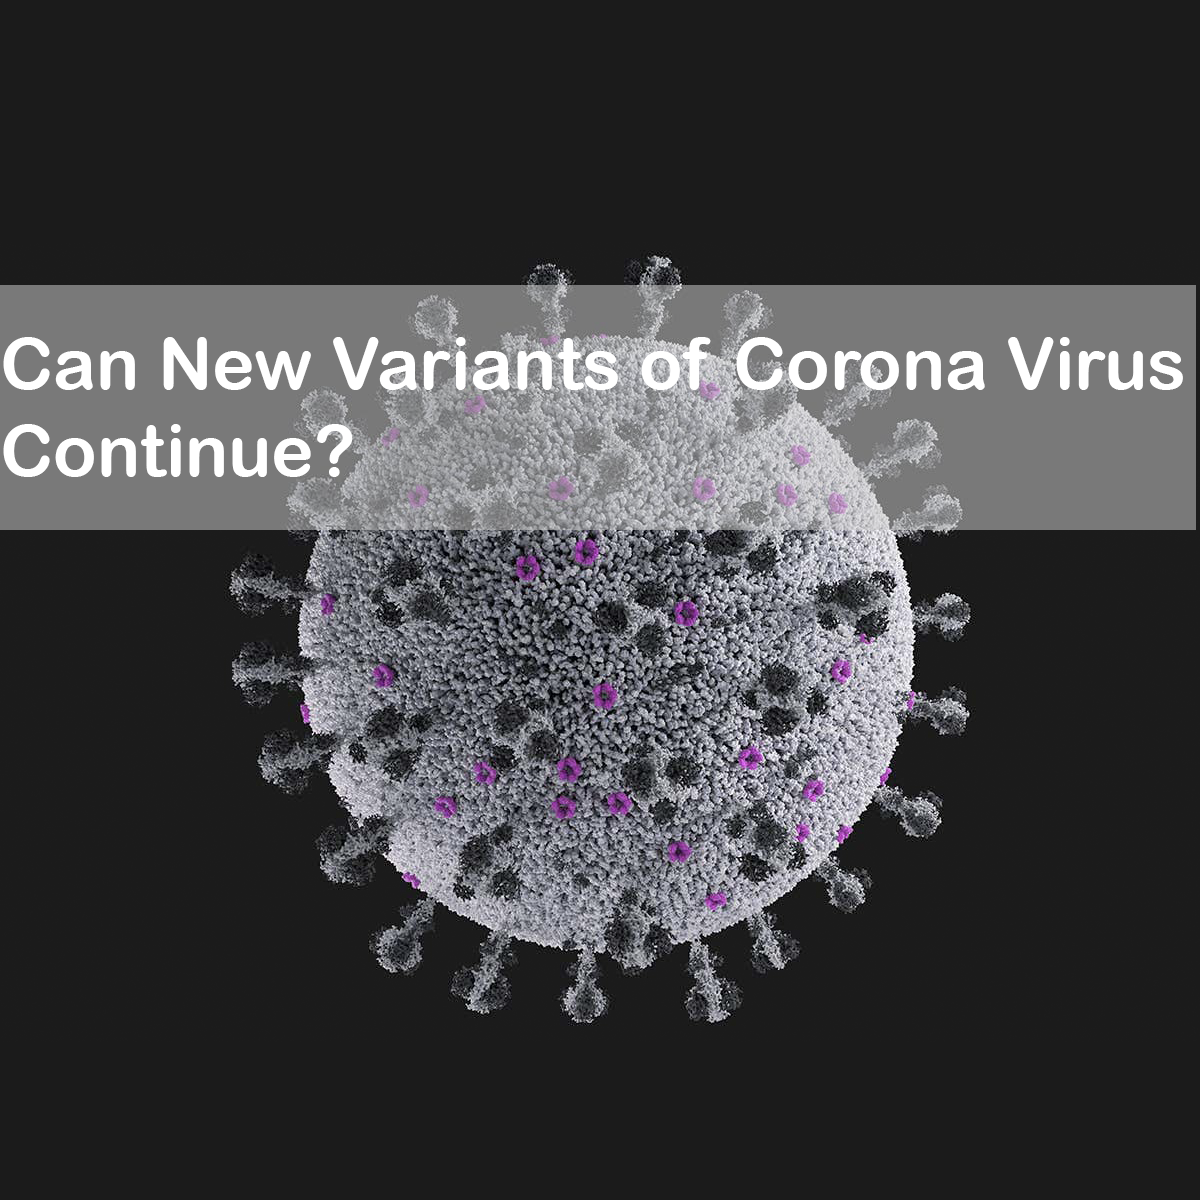 Can New Variants of Corona Virus Continue?